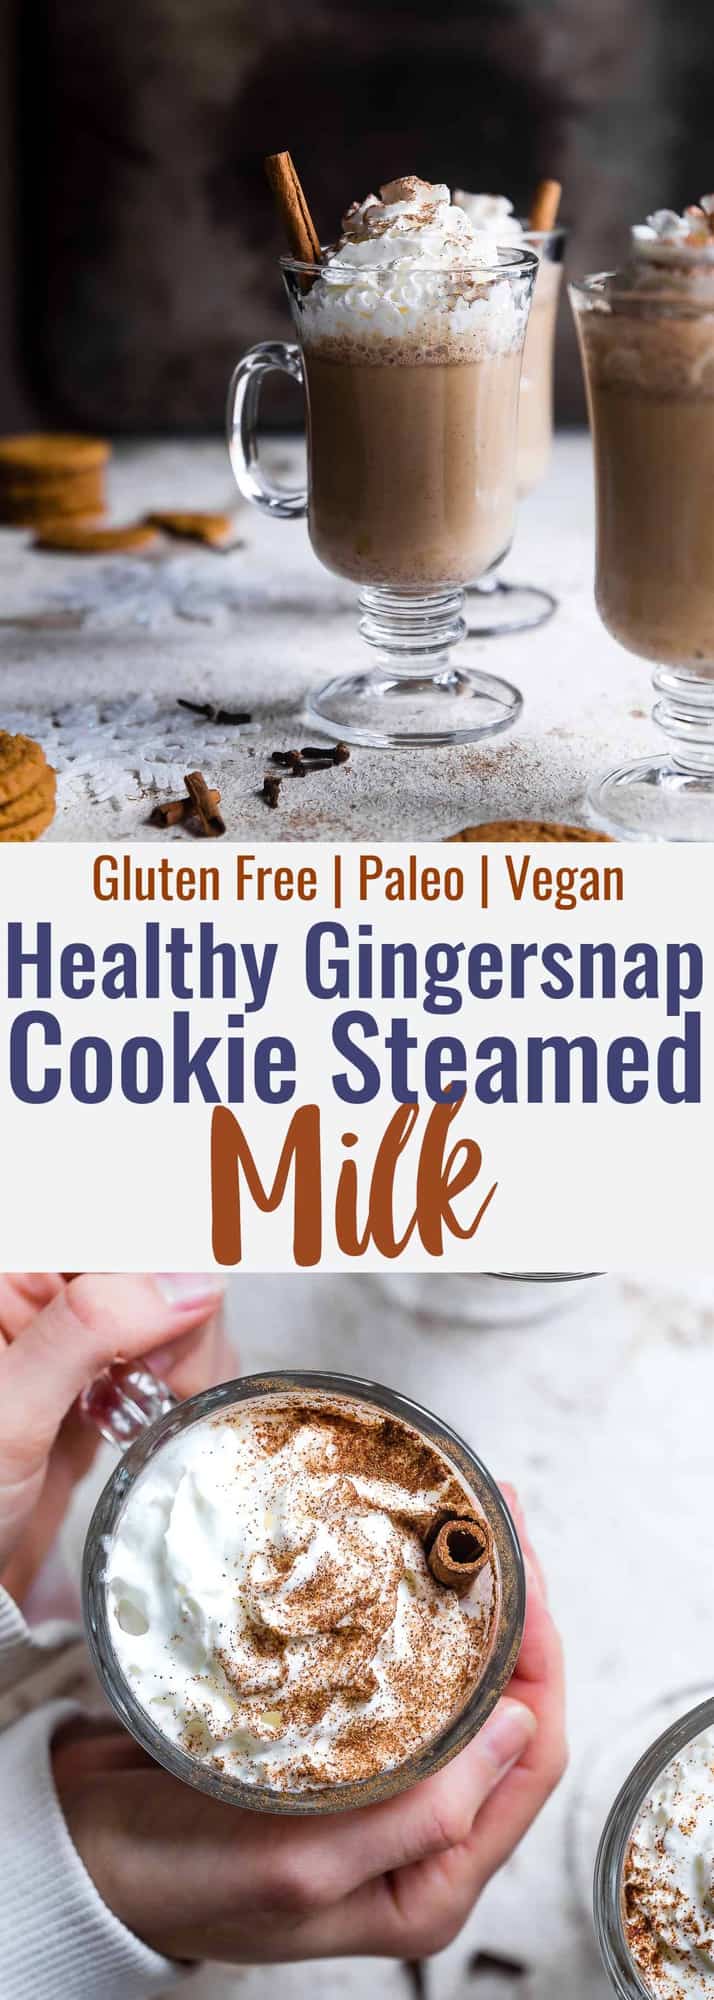 Ginger Snap Cookie Steamer Drink - This easy warm, cozy coconut milk steamer is made in a few minute and tastes just like a Cookie! Perfect for the holidays and paleo/vegan friendly! | #Foodfaithfitness | #Glutenfree #Healthy #Vegan #Paleo #Christmas